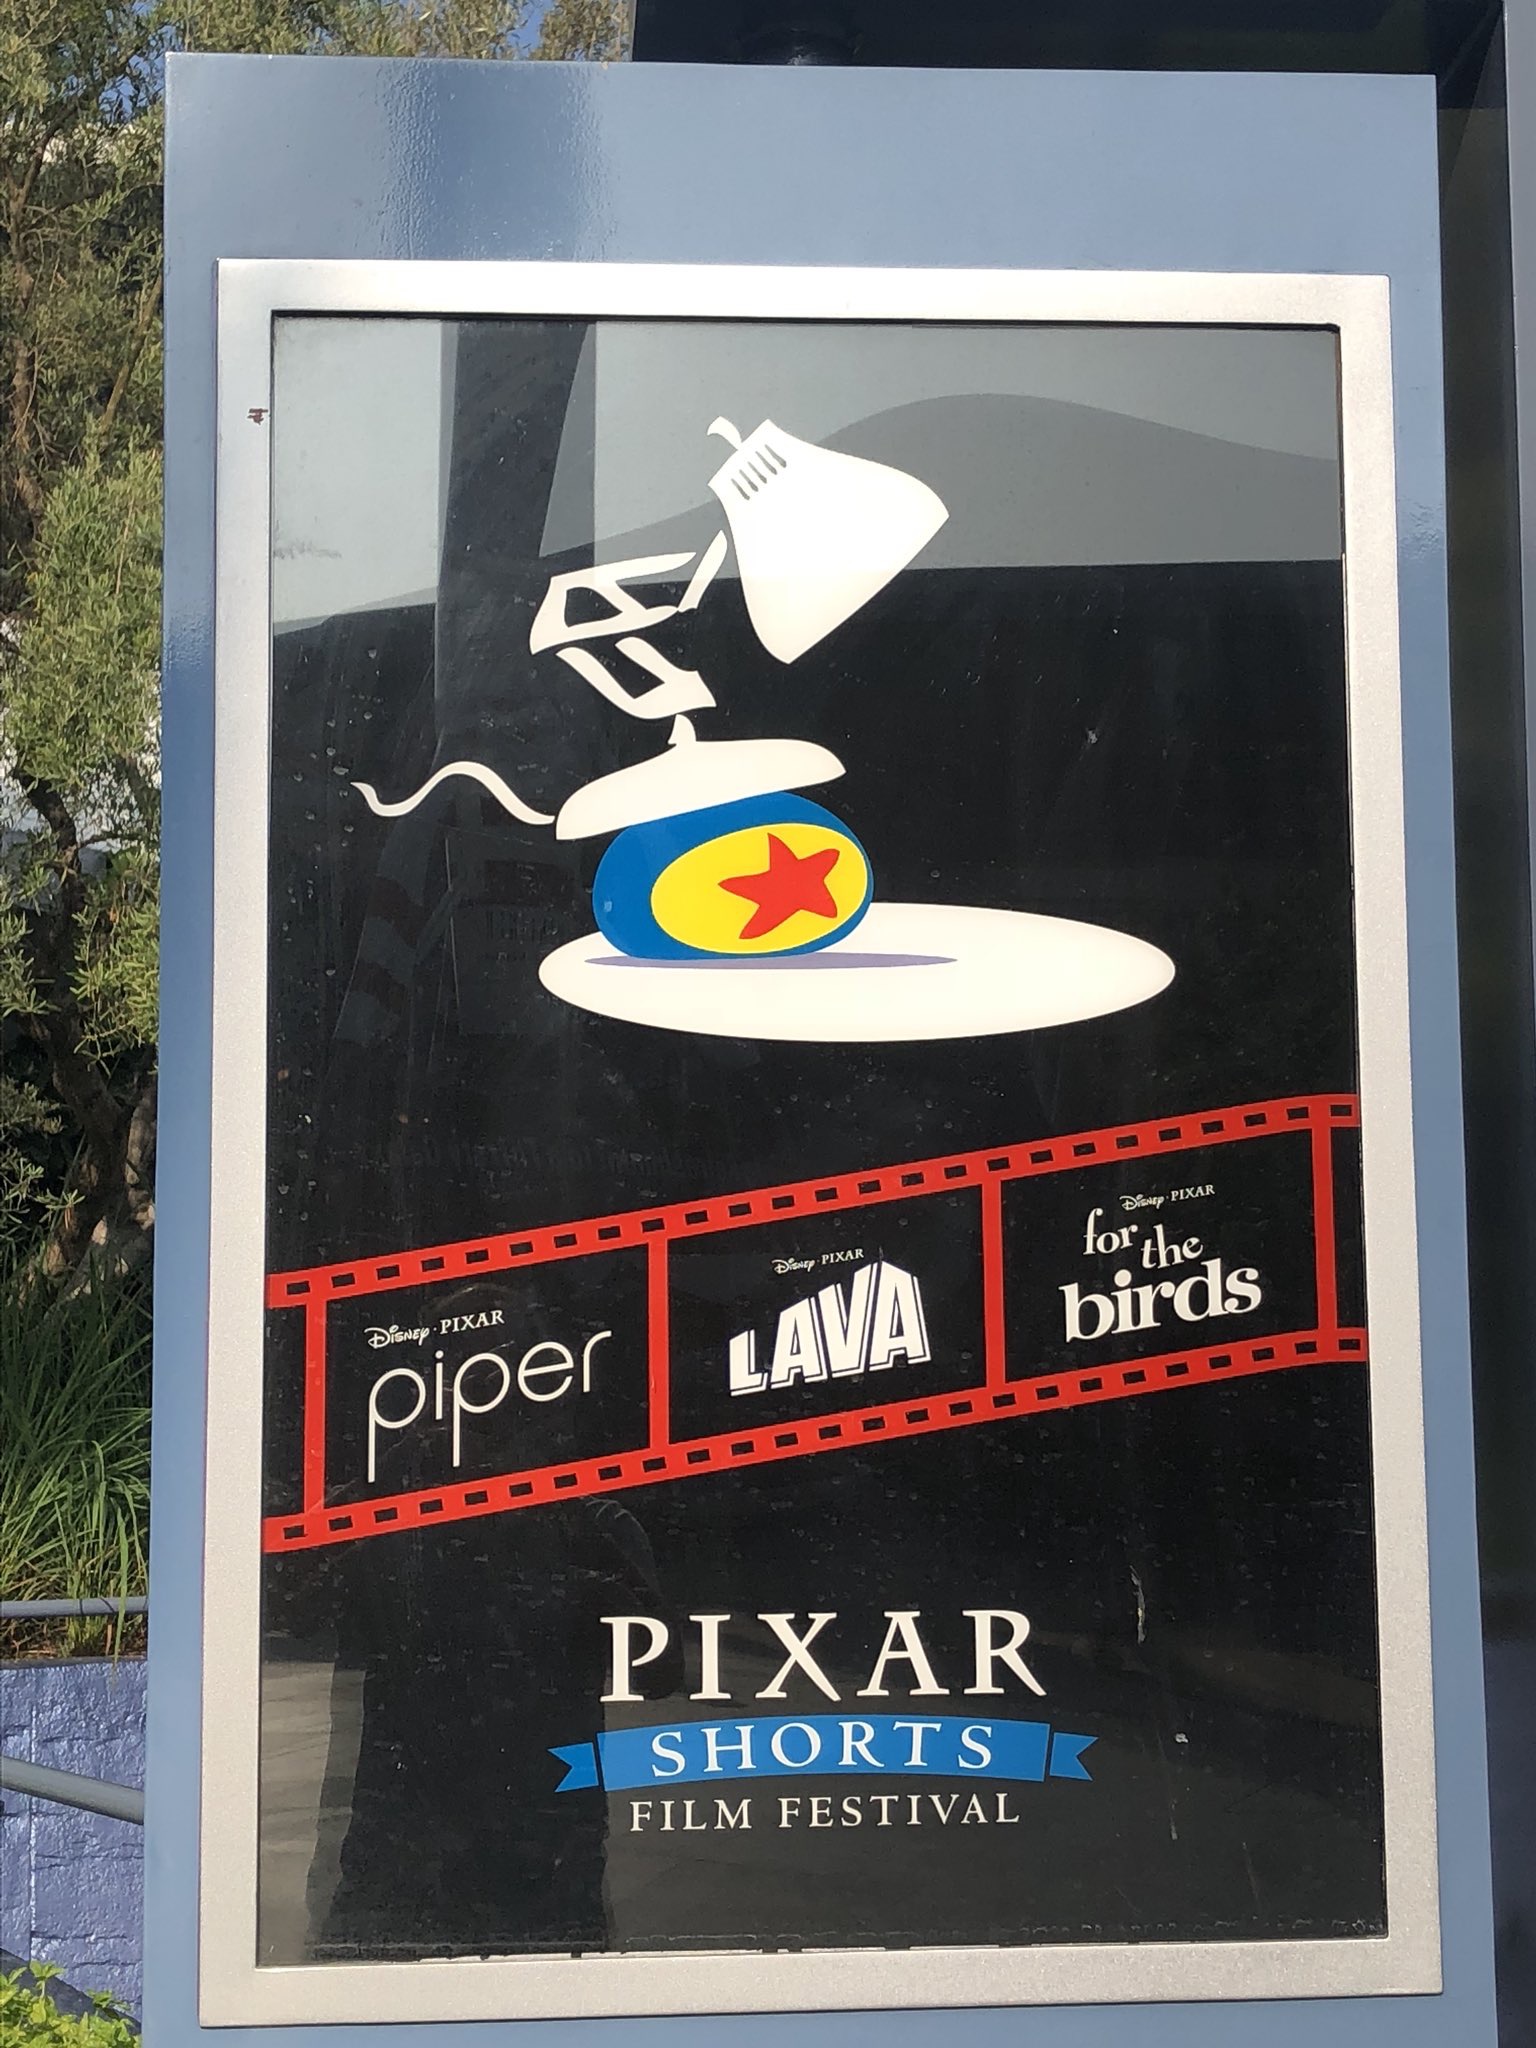 Pixar Shorts Film Festival Adds Second Location at Tomorrowland Theater